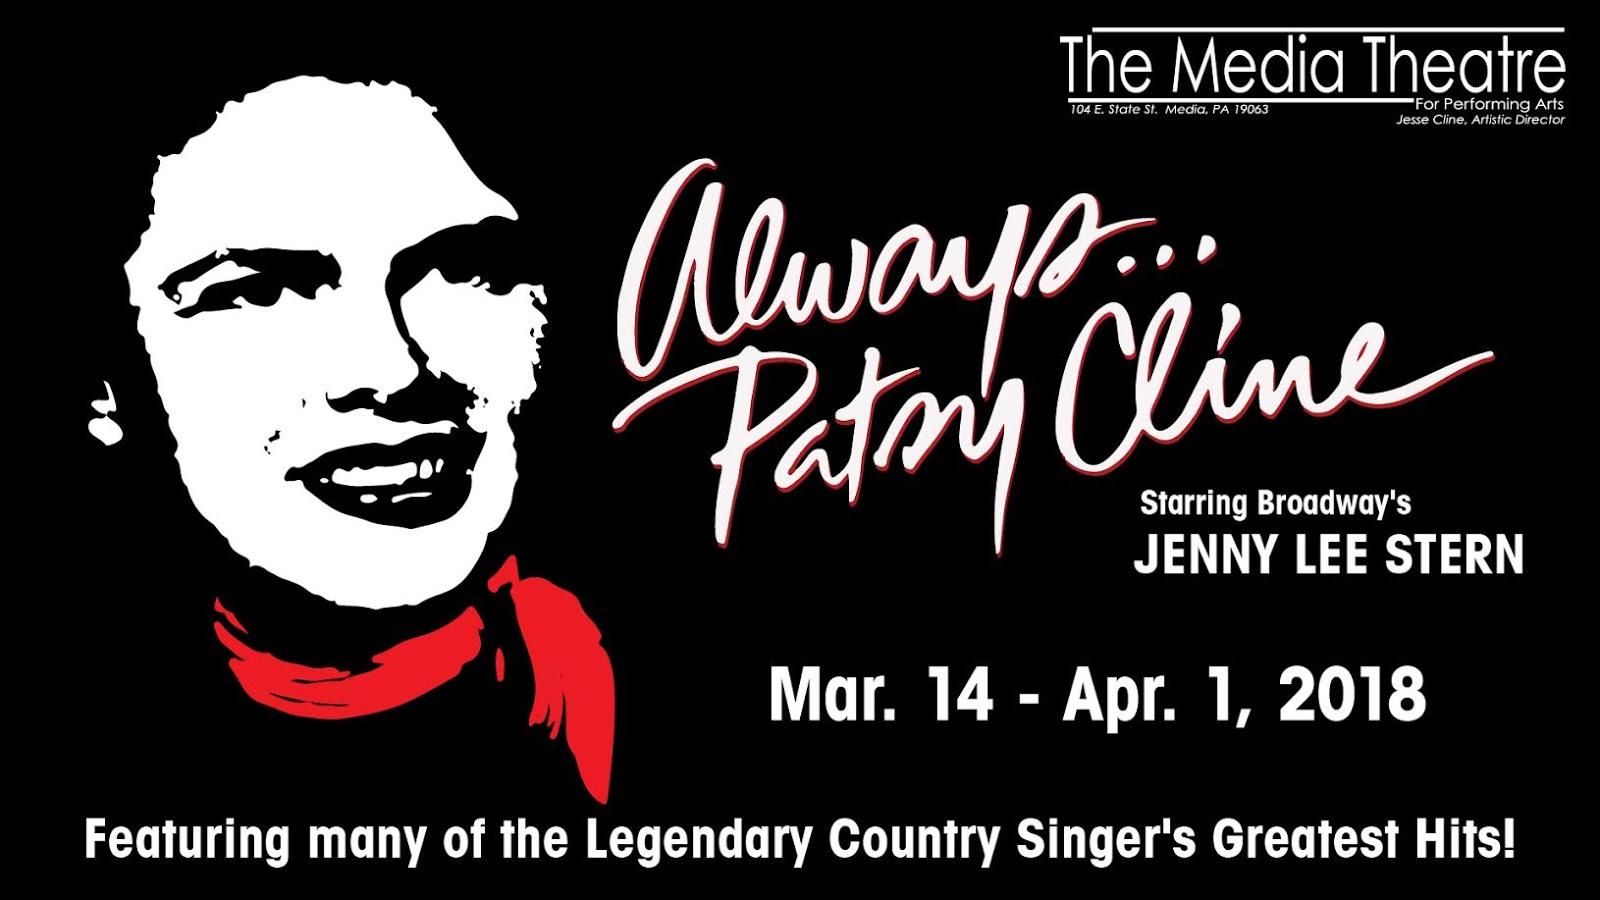 Media Theatre News!: 'ALWAYS, PATSY CLINE' IS ON STAGE AT THE MEDIA